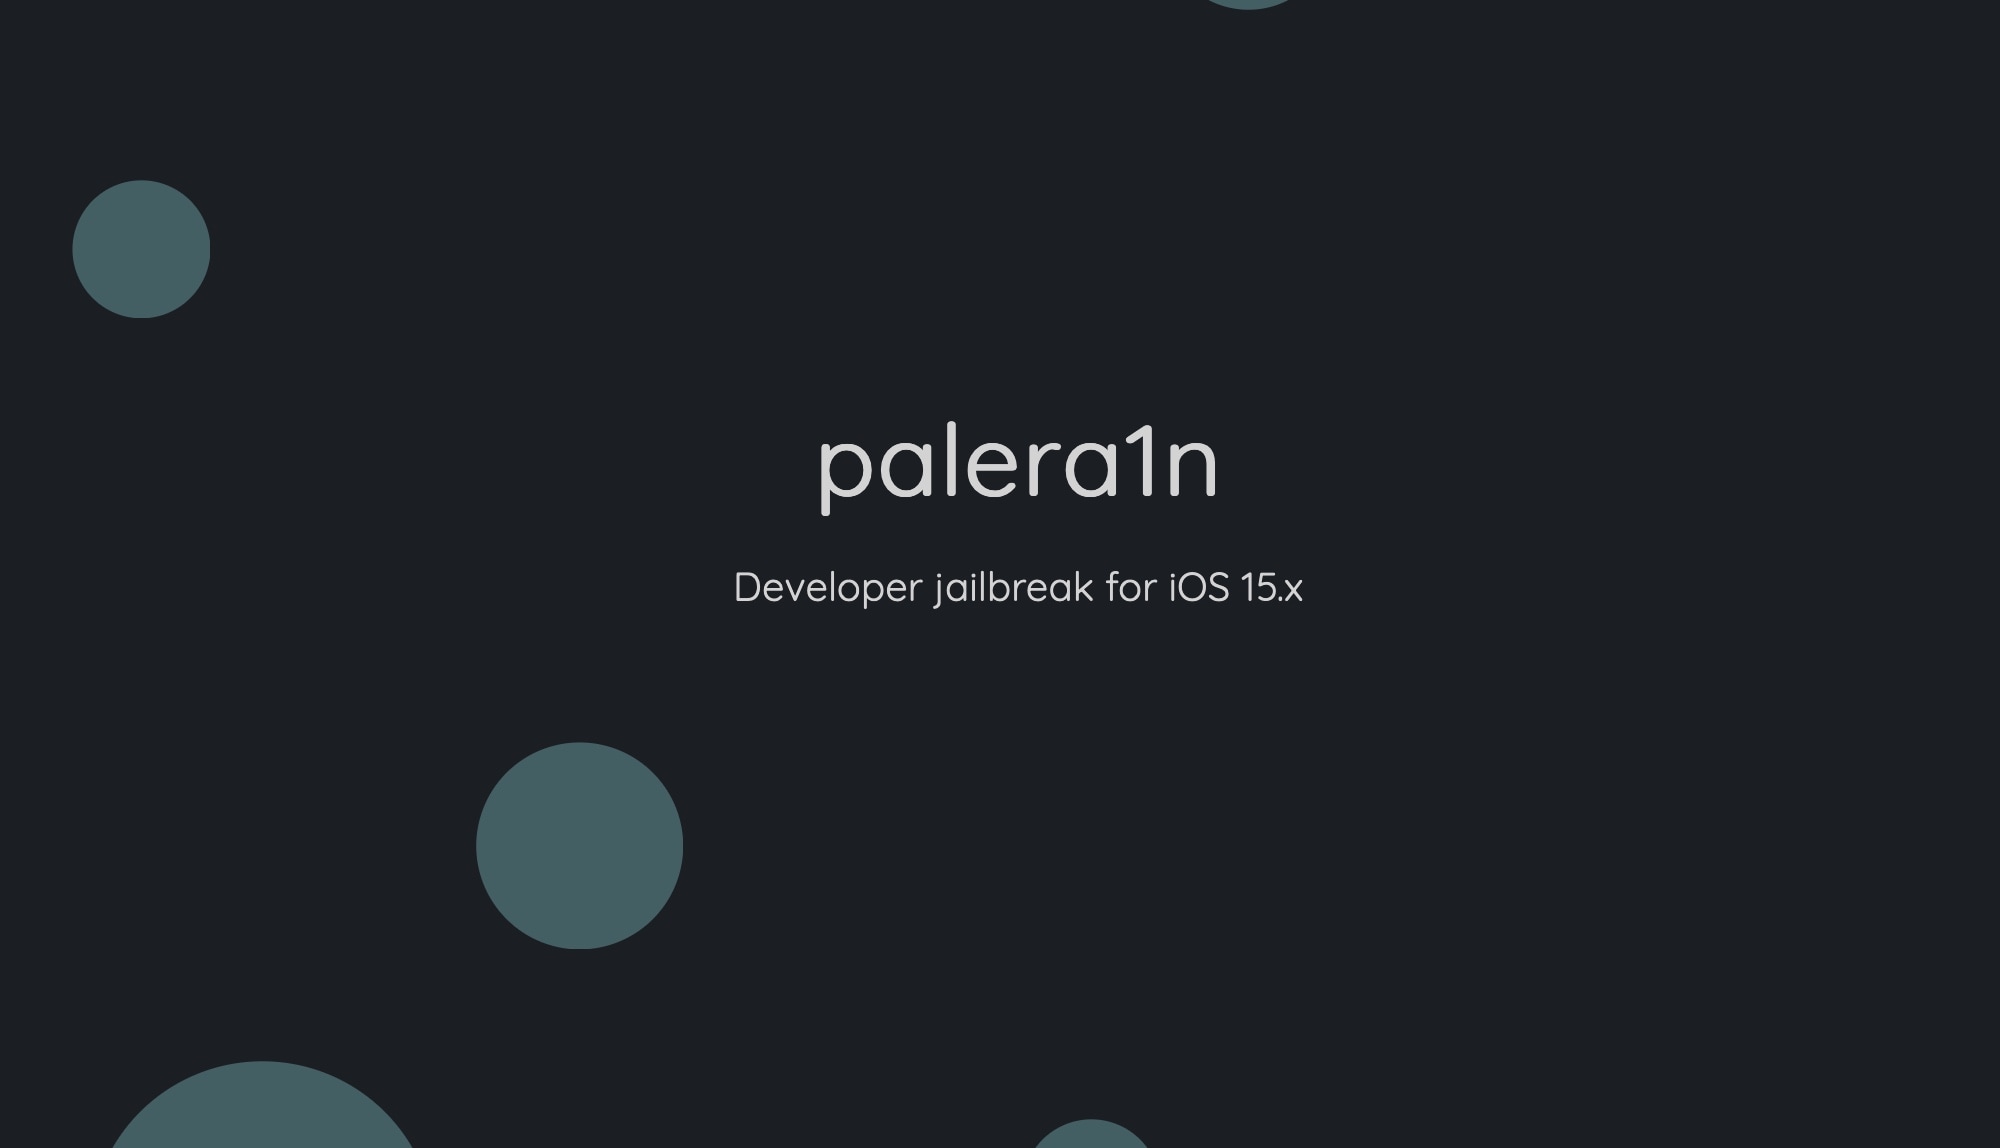 Palera1n checkm8-based iOS 15.x jailbreak for developers adds tweak injection support for more devices